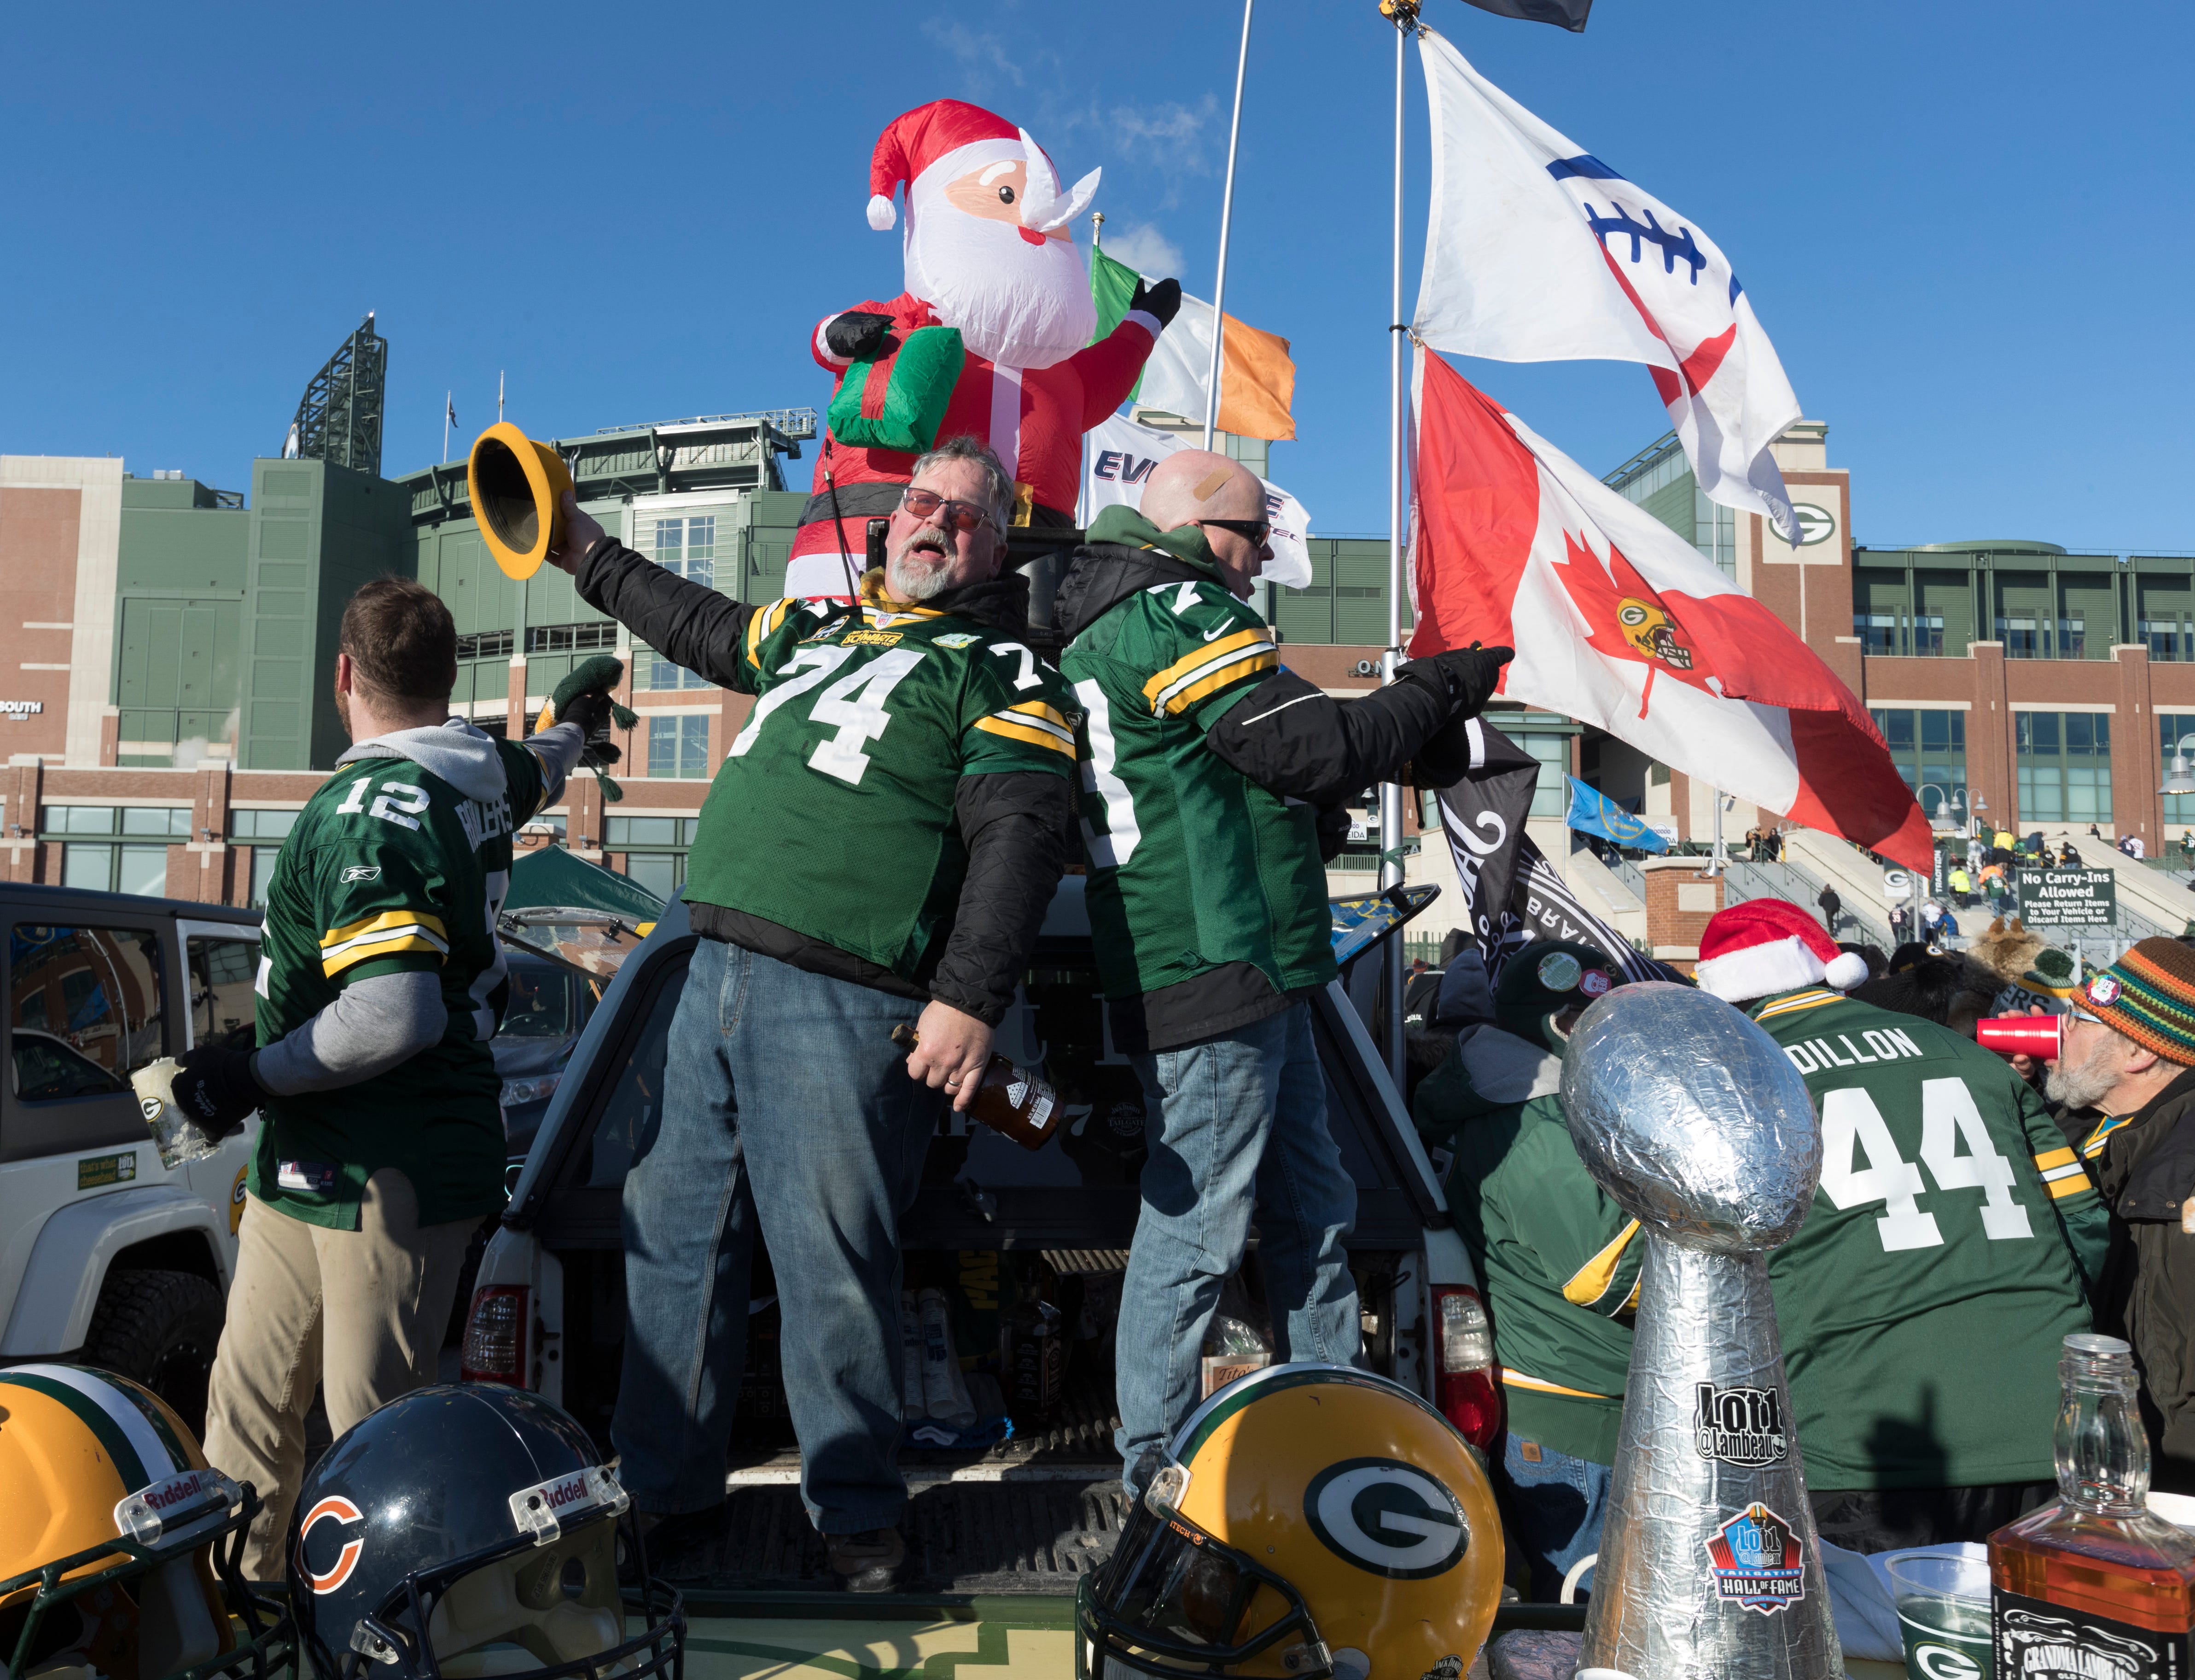 Tailgaters entertain fans with a song before the Green Bay Packers game against the Chicago Bears Sunday, December 15, 2019 at Lambeau Field in Green Bay, Wis. She is from Rochester, NY.